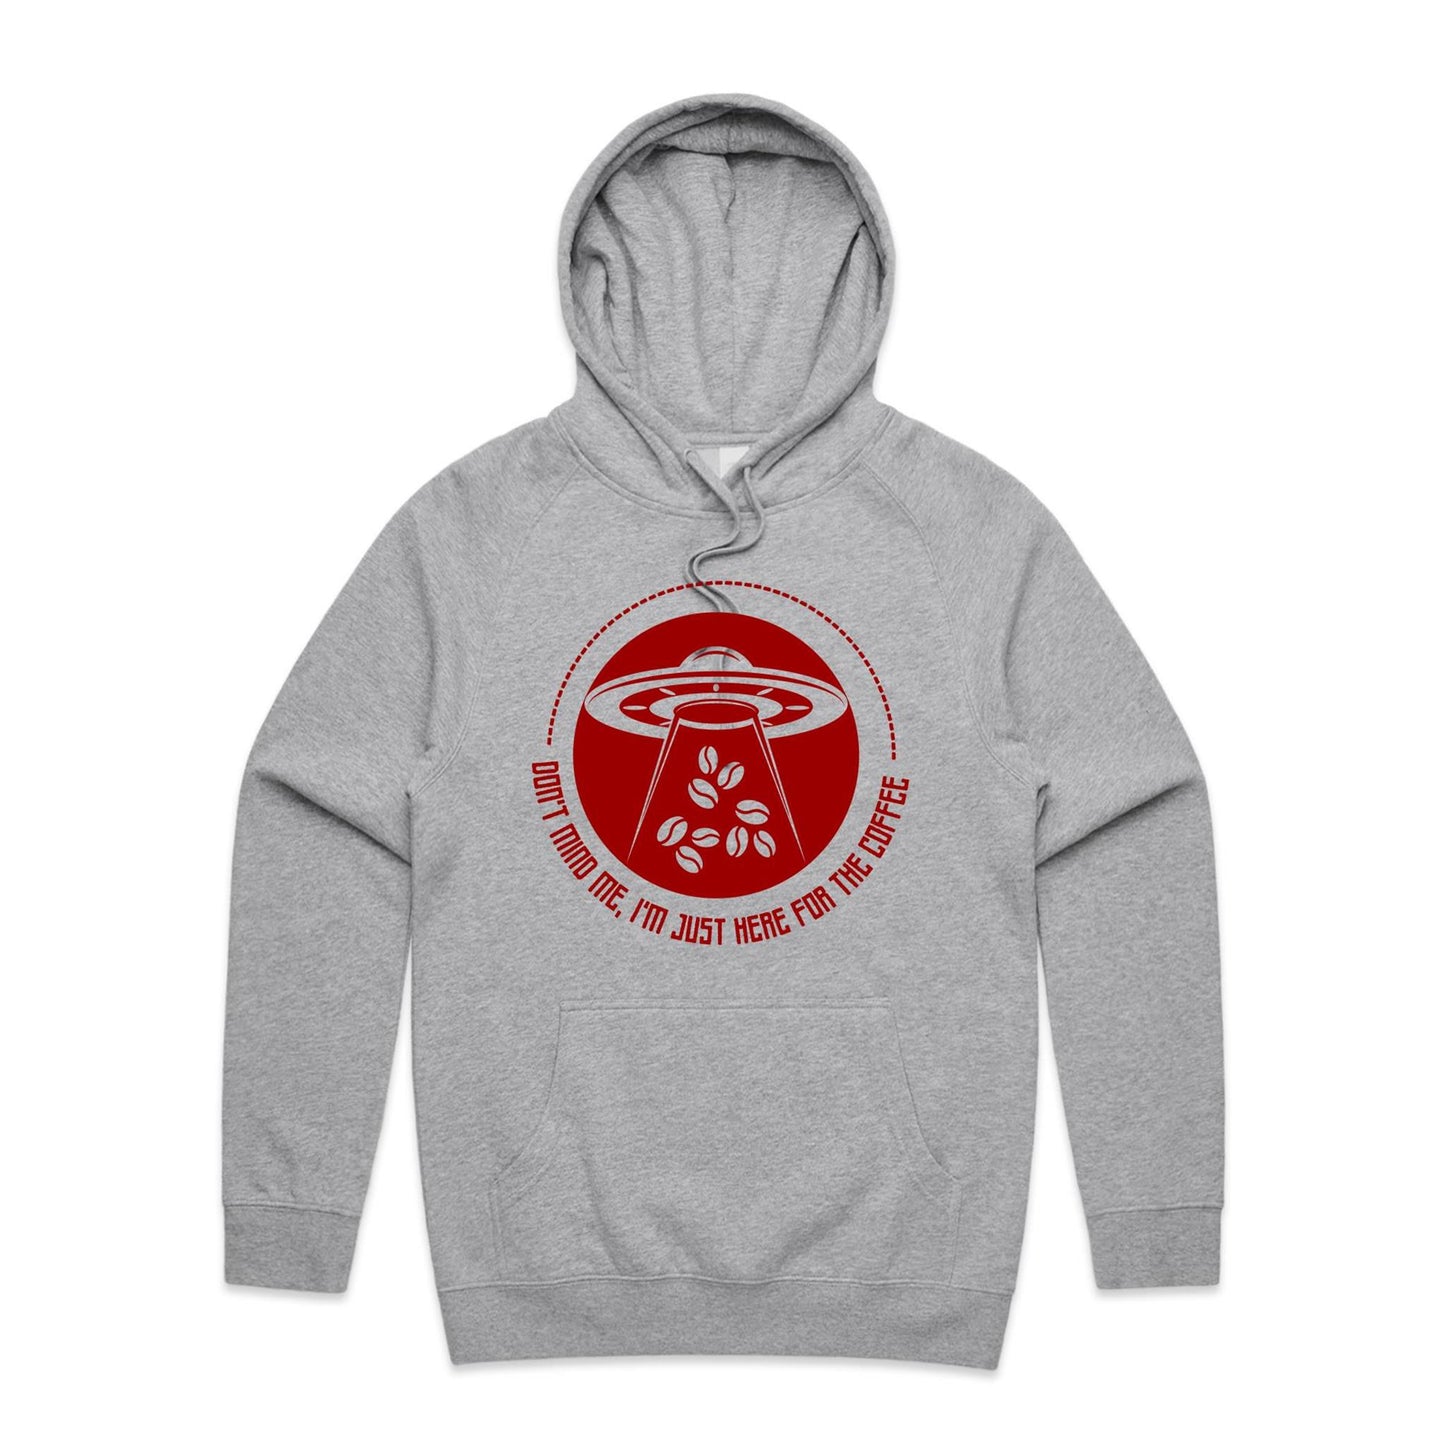 Don't Mind Me, I'm Just Here For The Coffee, Alien UFO - Supply Hood Grey Marle Mens Supply Hoodie Coffee Sci Fi